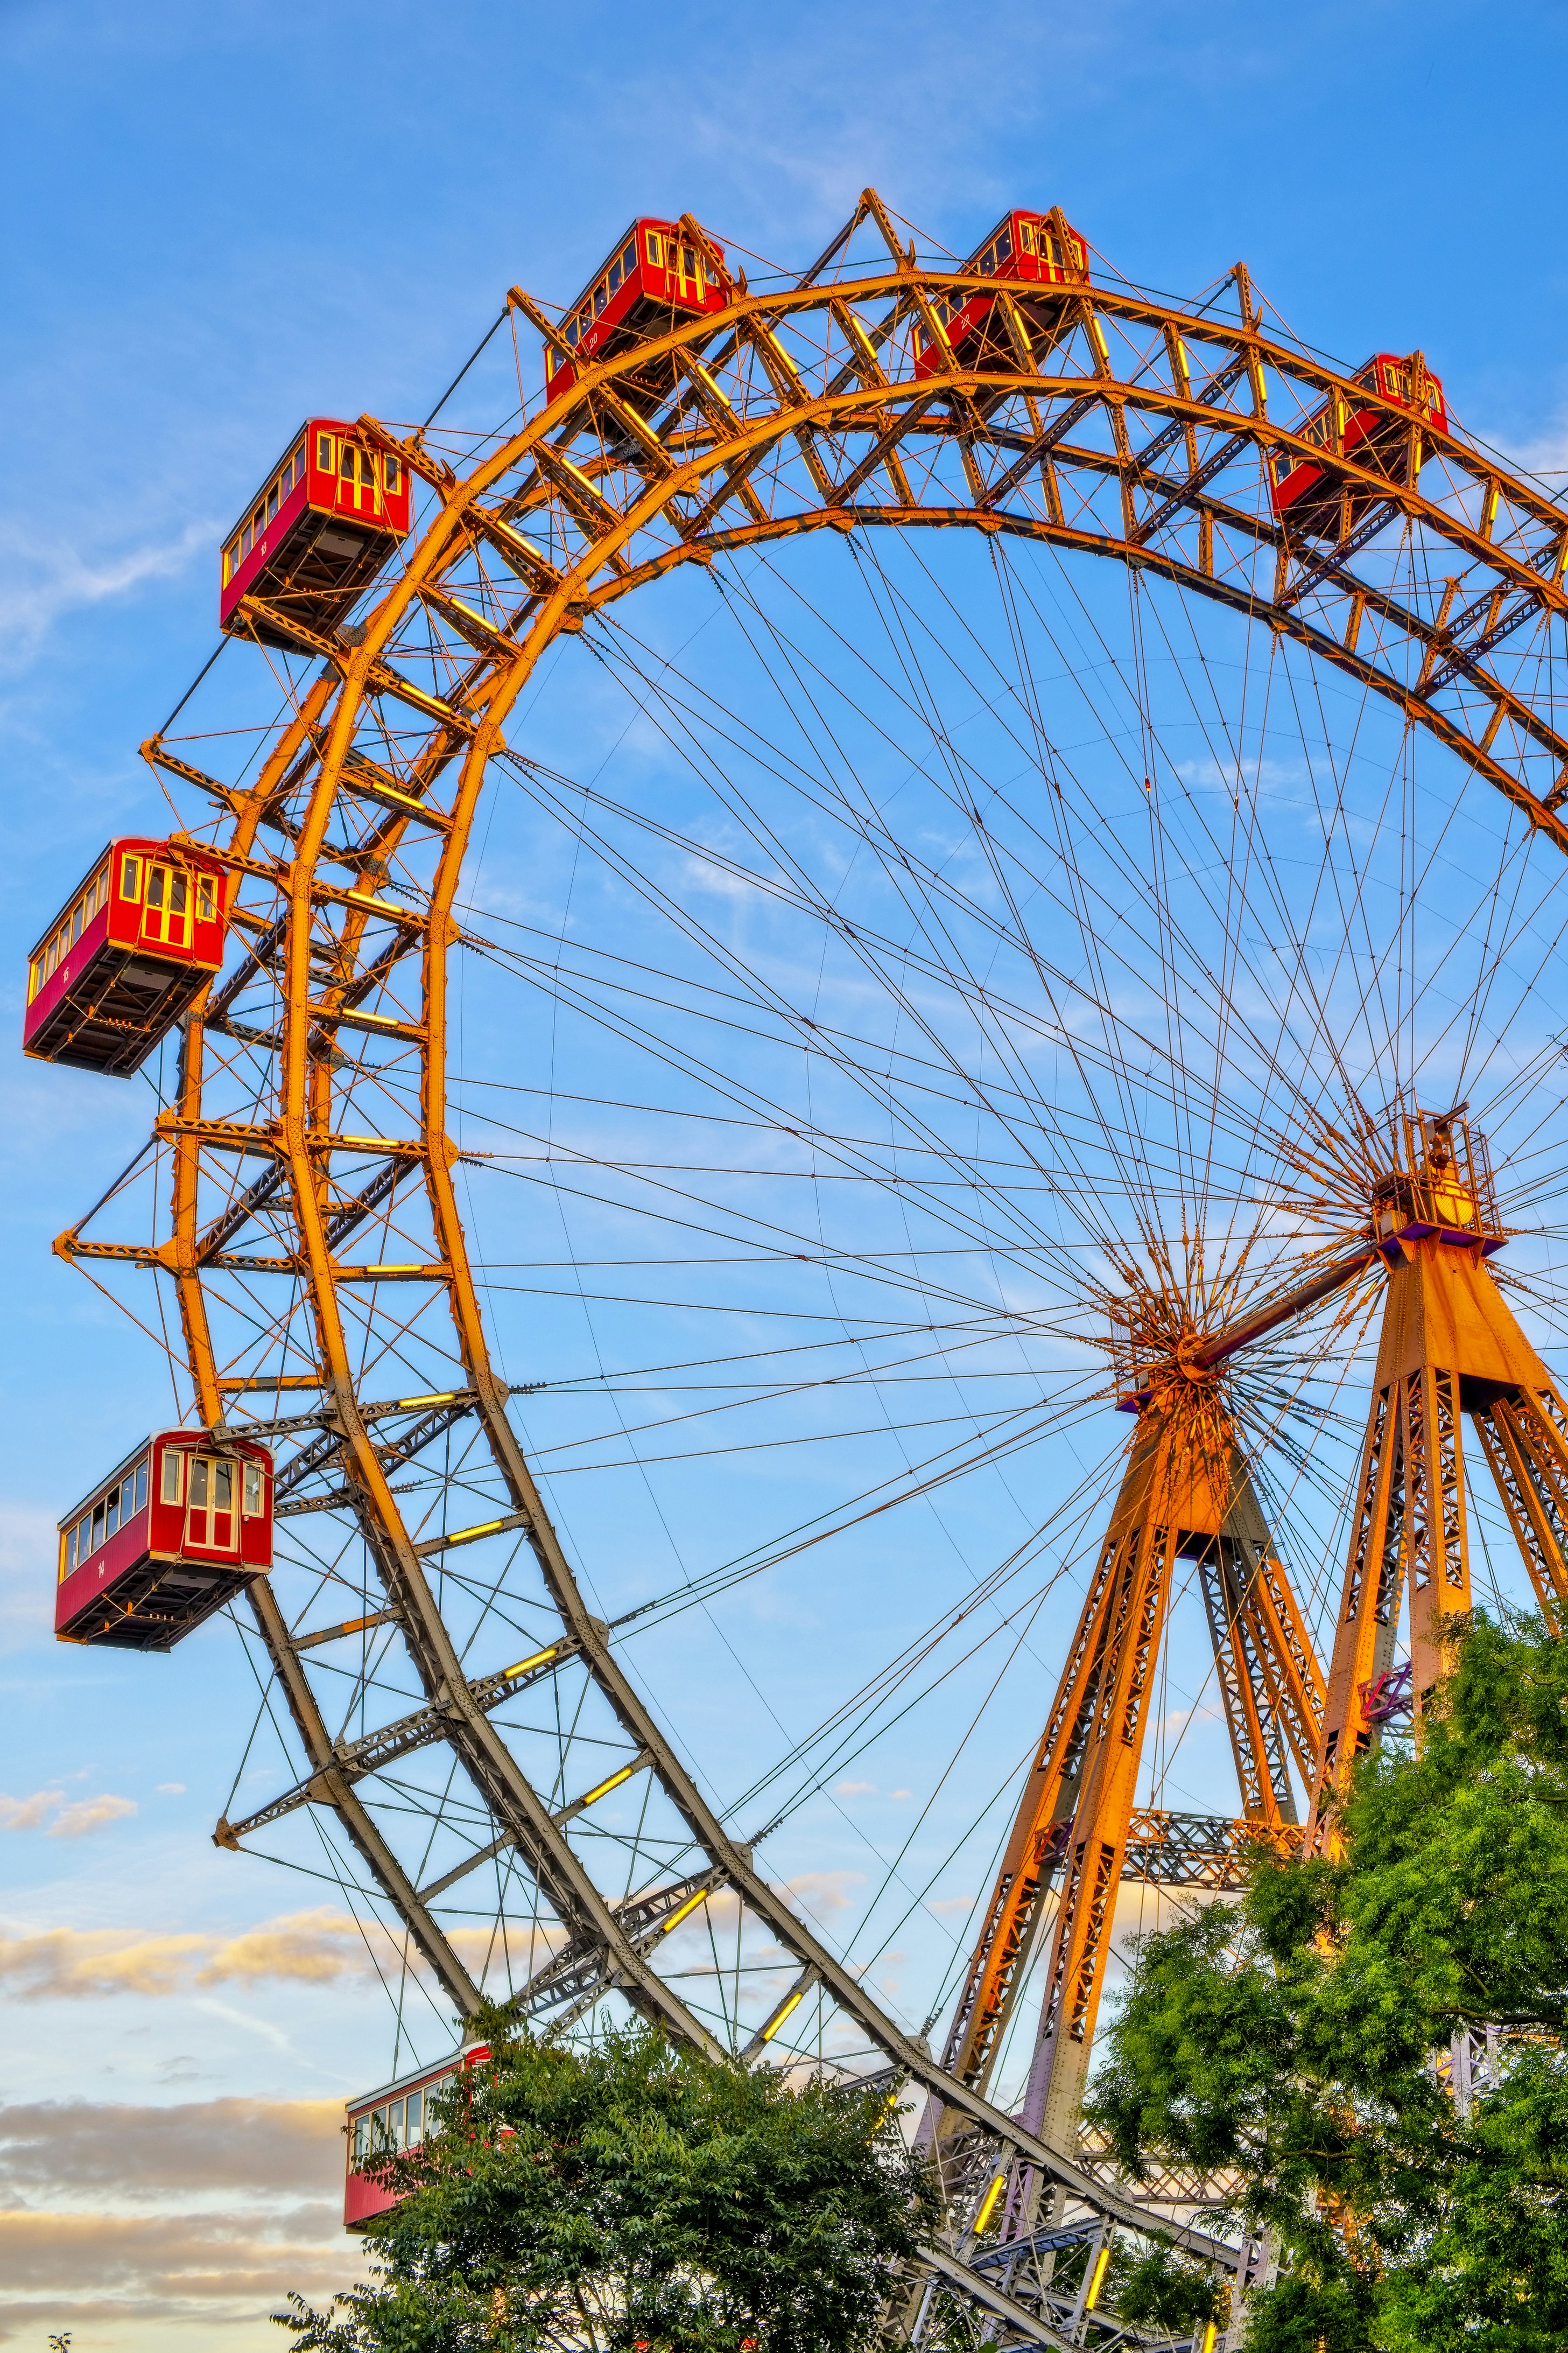 The huge Ferris Wheel in Prater Park in Vienna; attached to the yellow wheel are several enclosed red cabins.